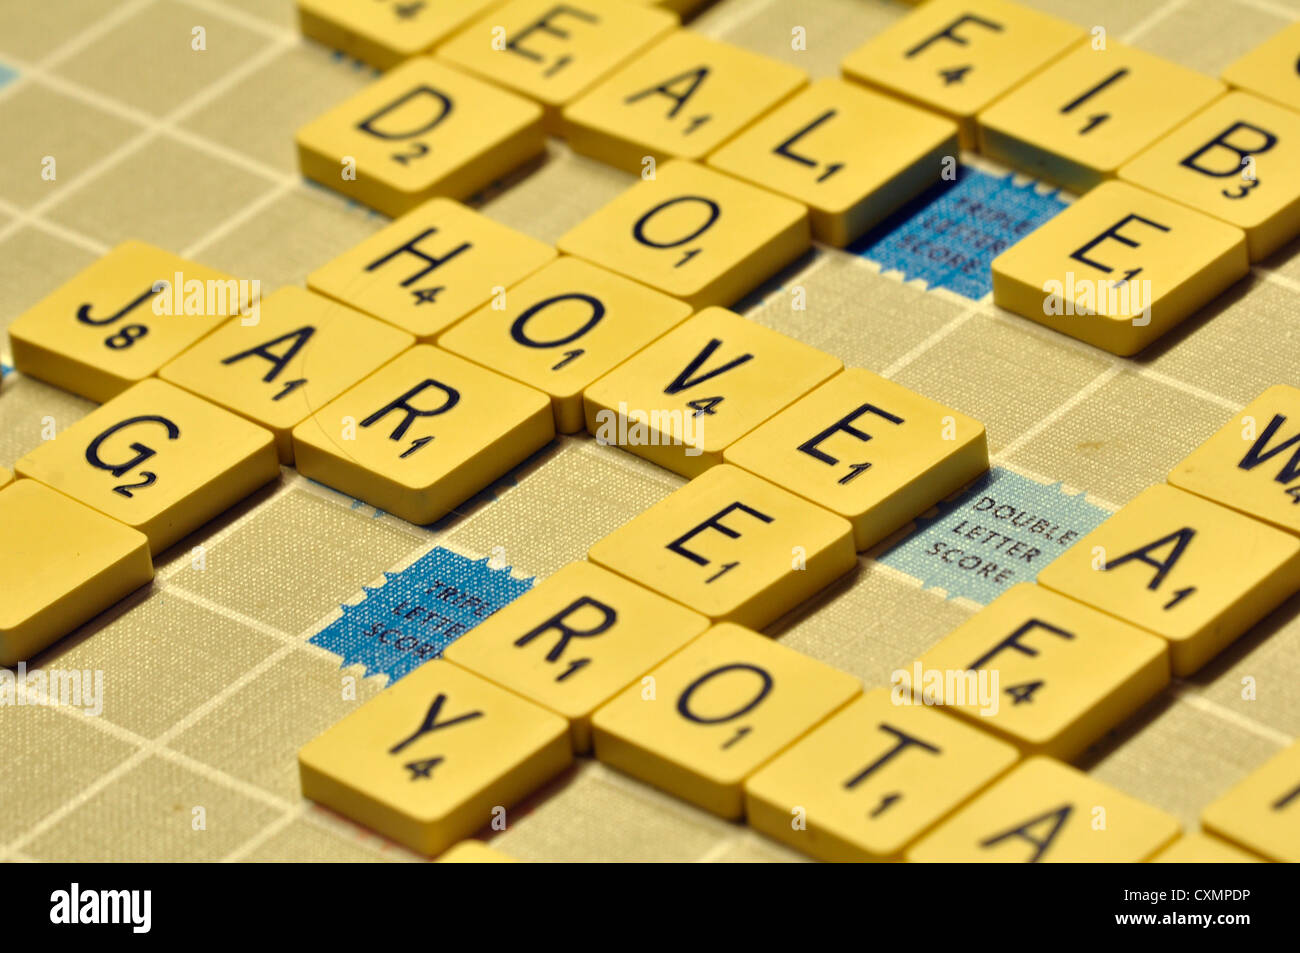 A game of Scrabble in progress UK Stock Photo - Alamy